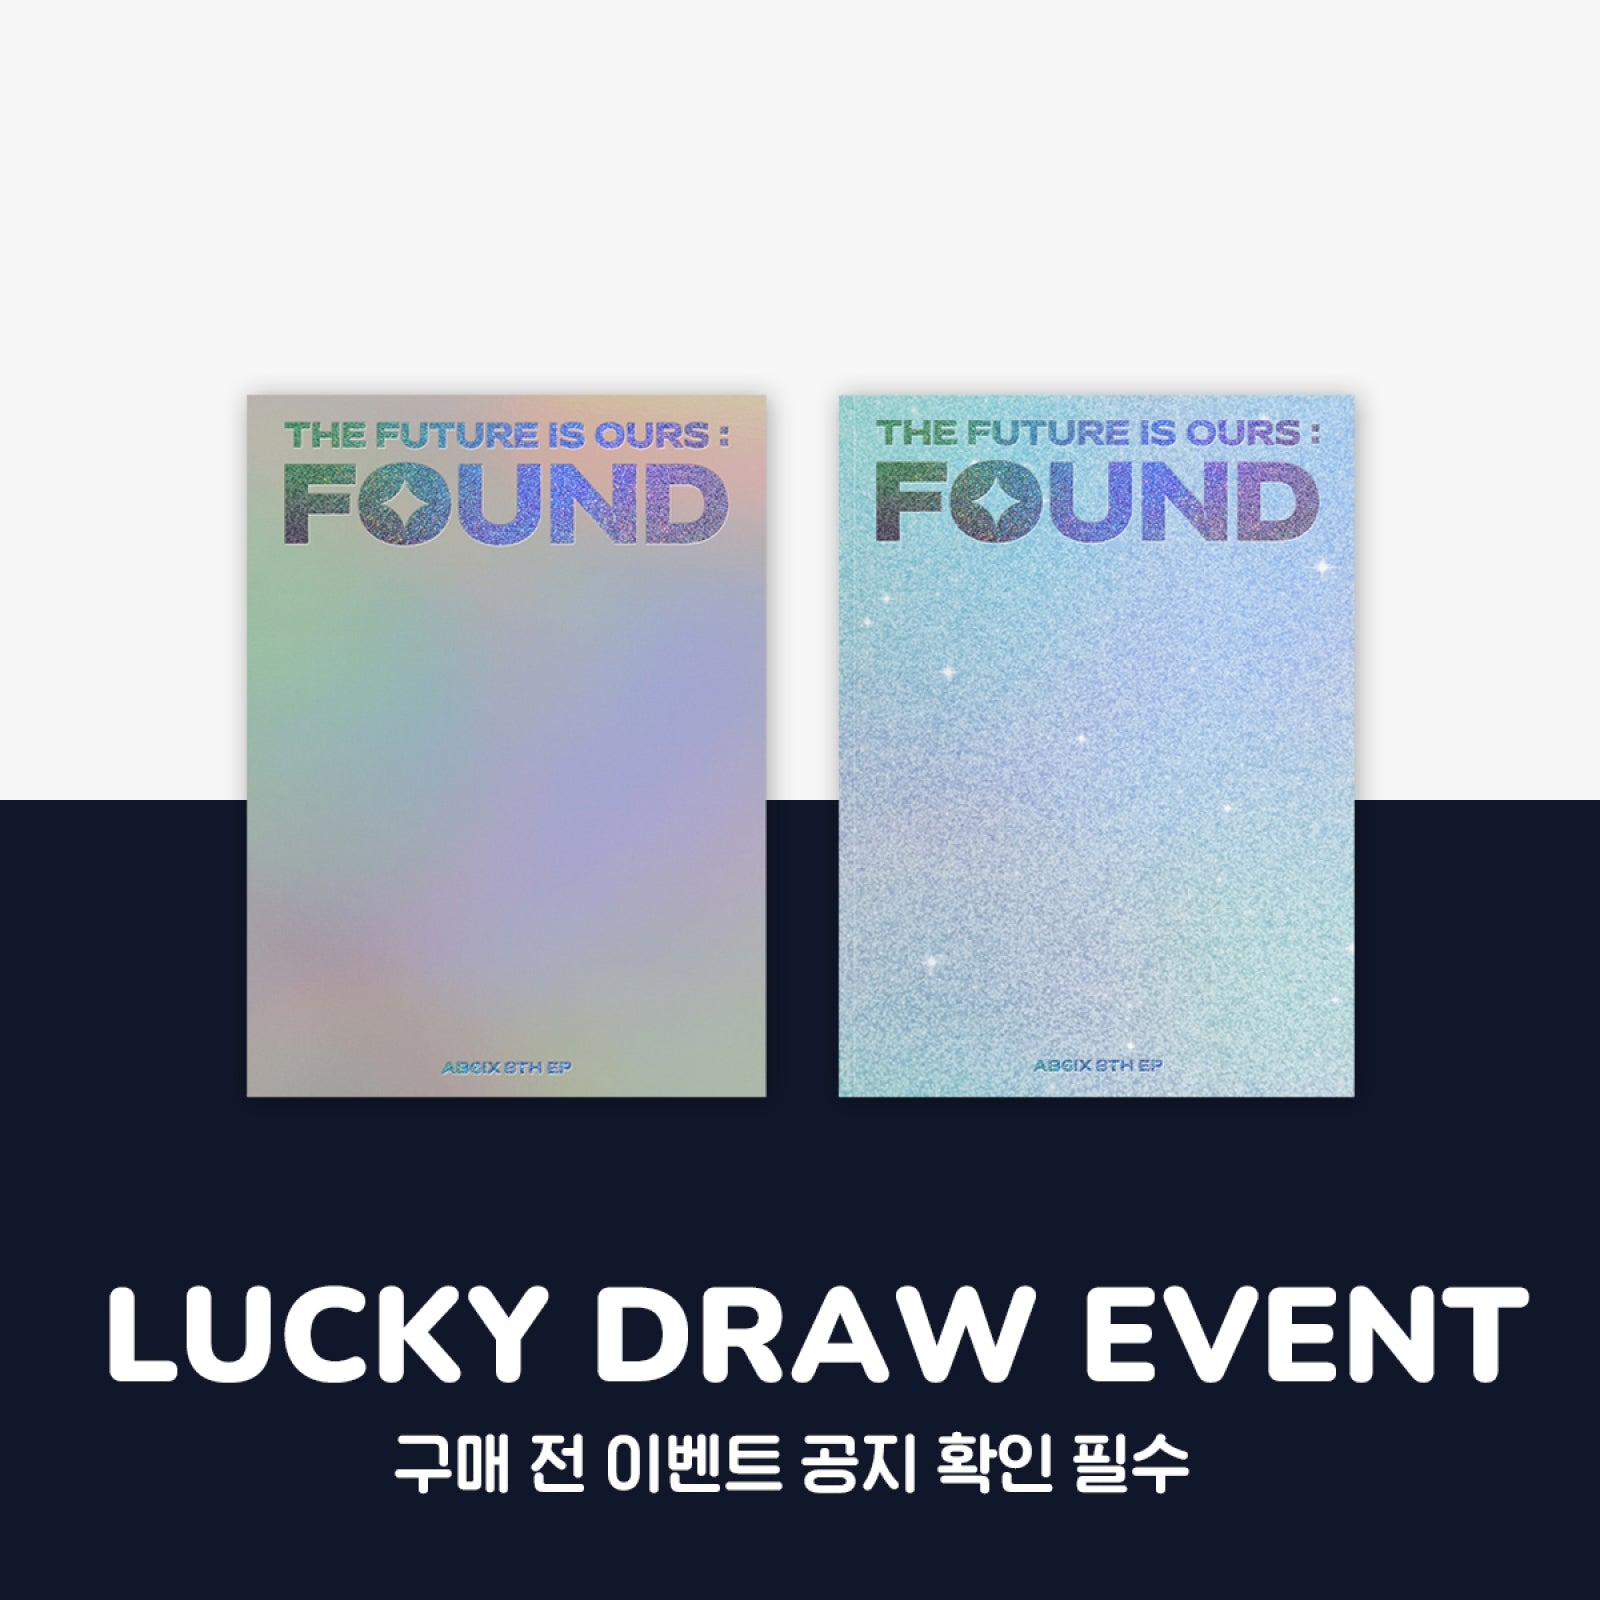 AB6IX - THE FUTURE IS OURS: FOUND 8TH EP ALBUM WITHMUU LUCKY DRAW EVENT RANDOM - COKODIVE